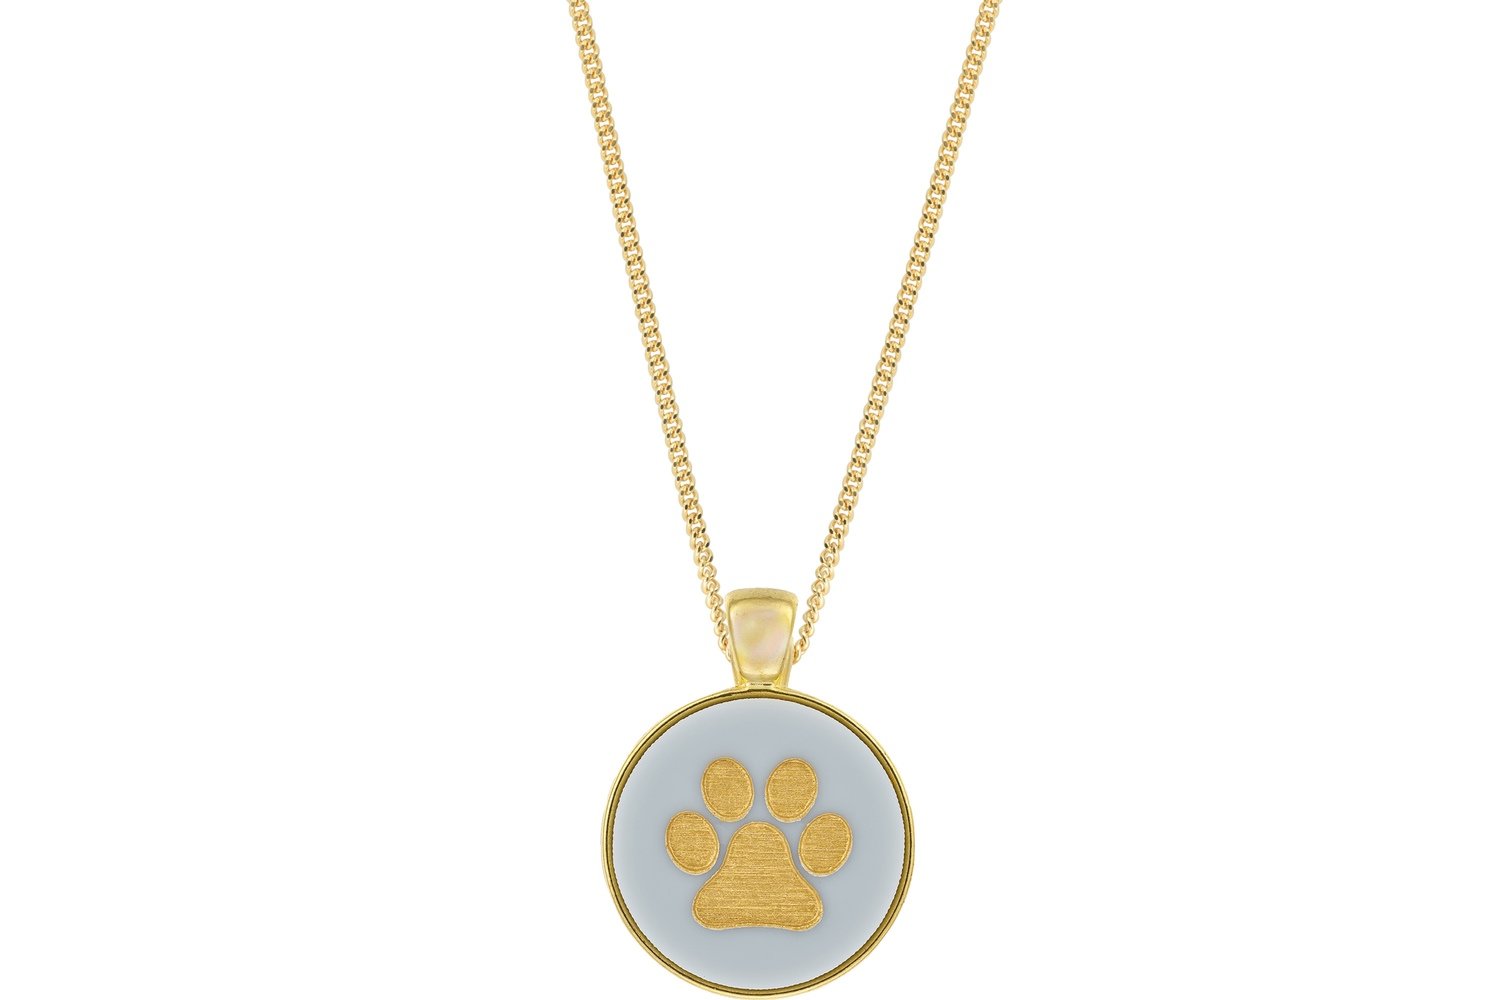 Dog Paw Print Pendant Classic Style with Bezel on Chain Necklace